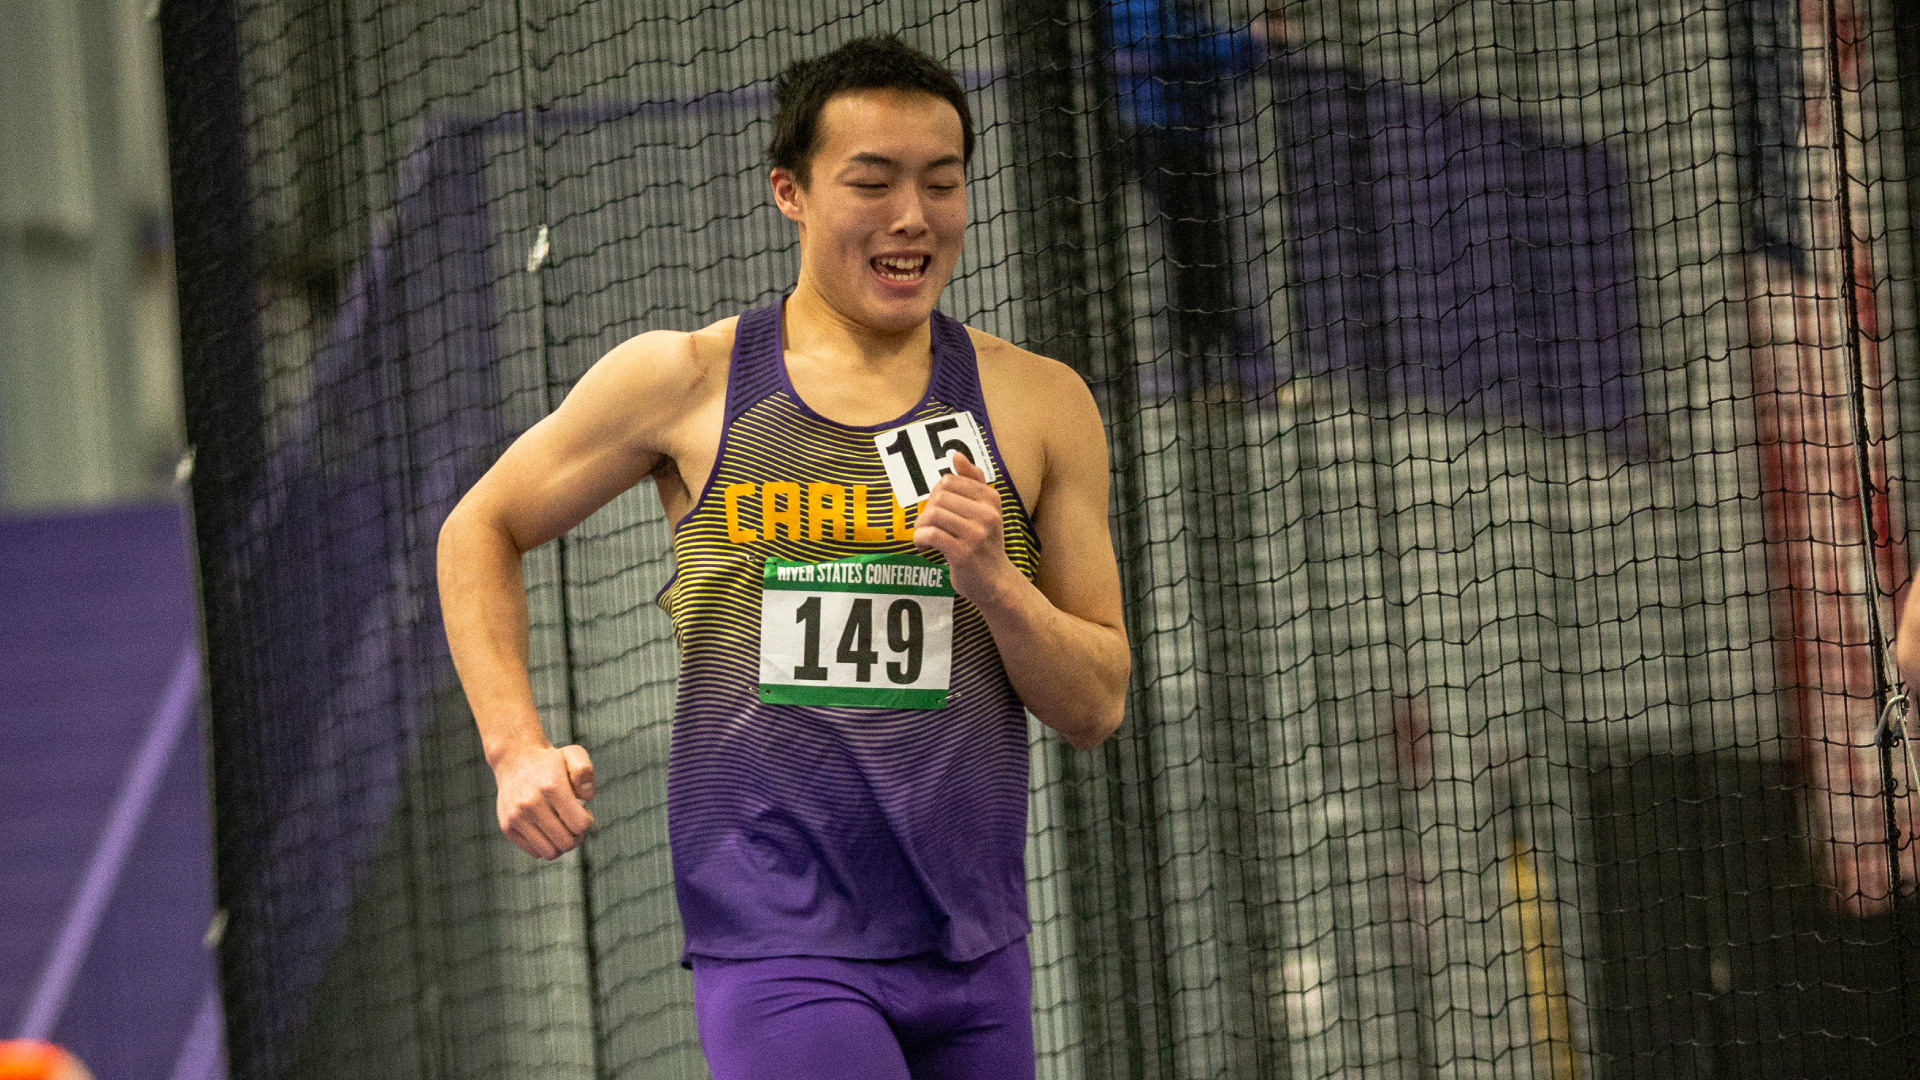 Bryan Pan tied his personal best in the 60-meter dash. Archived photo by William Conley.